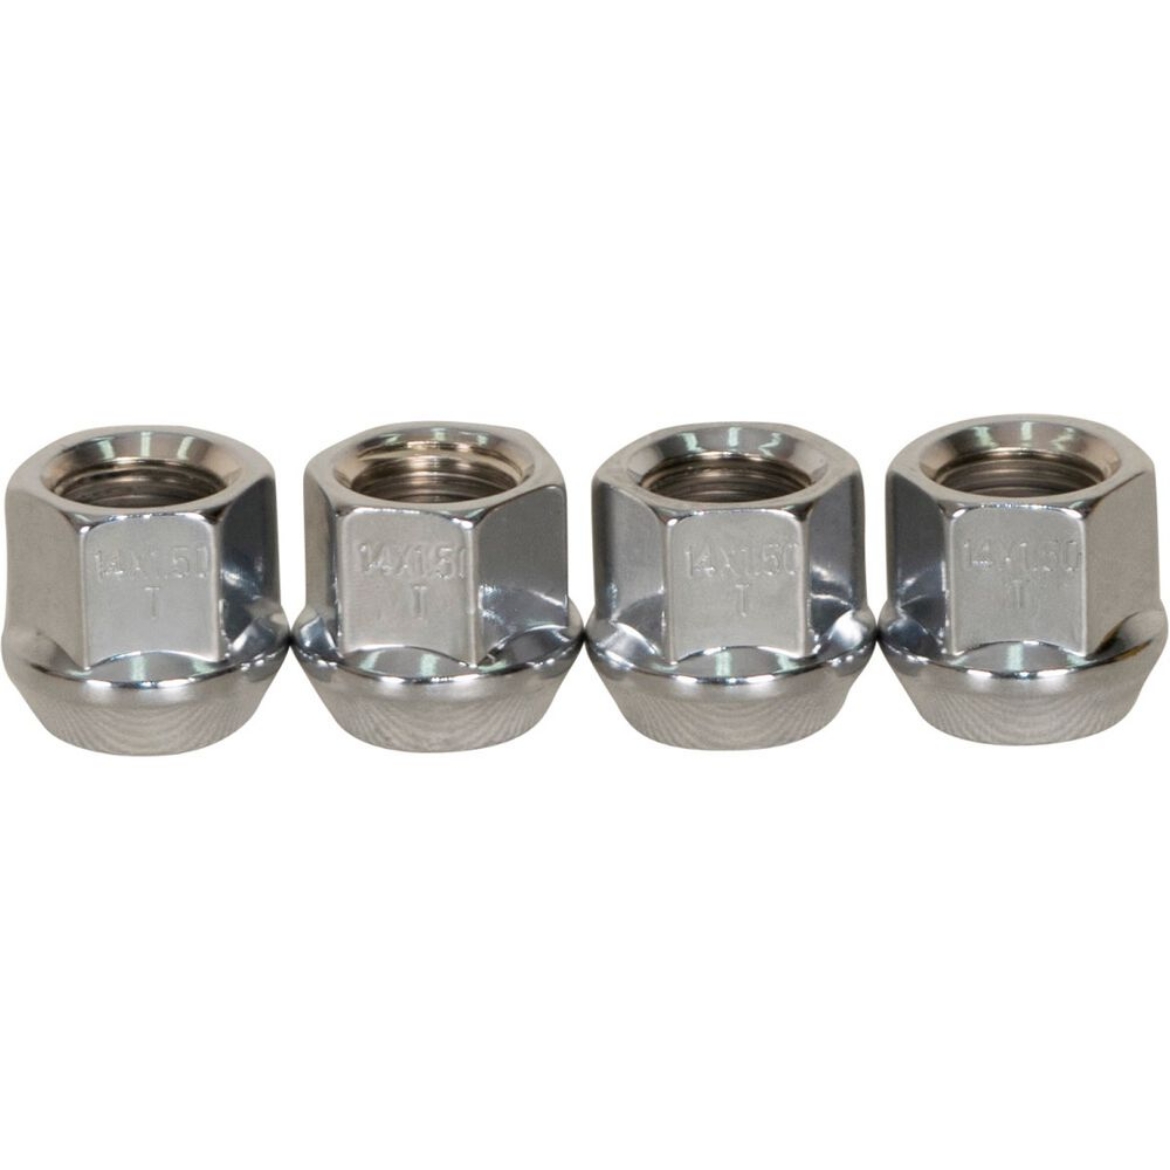 Picture of Wheel Nuts - M14 x 1.5 - thread length is 22mm